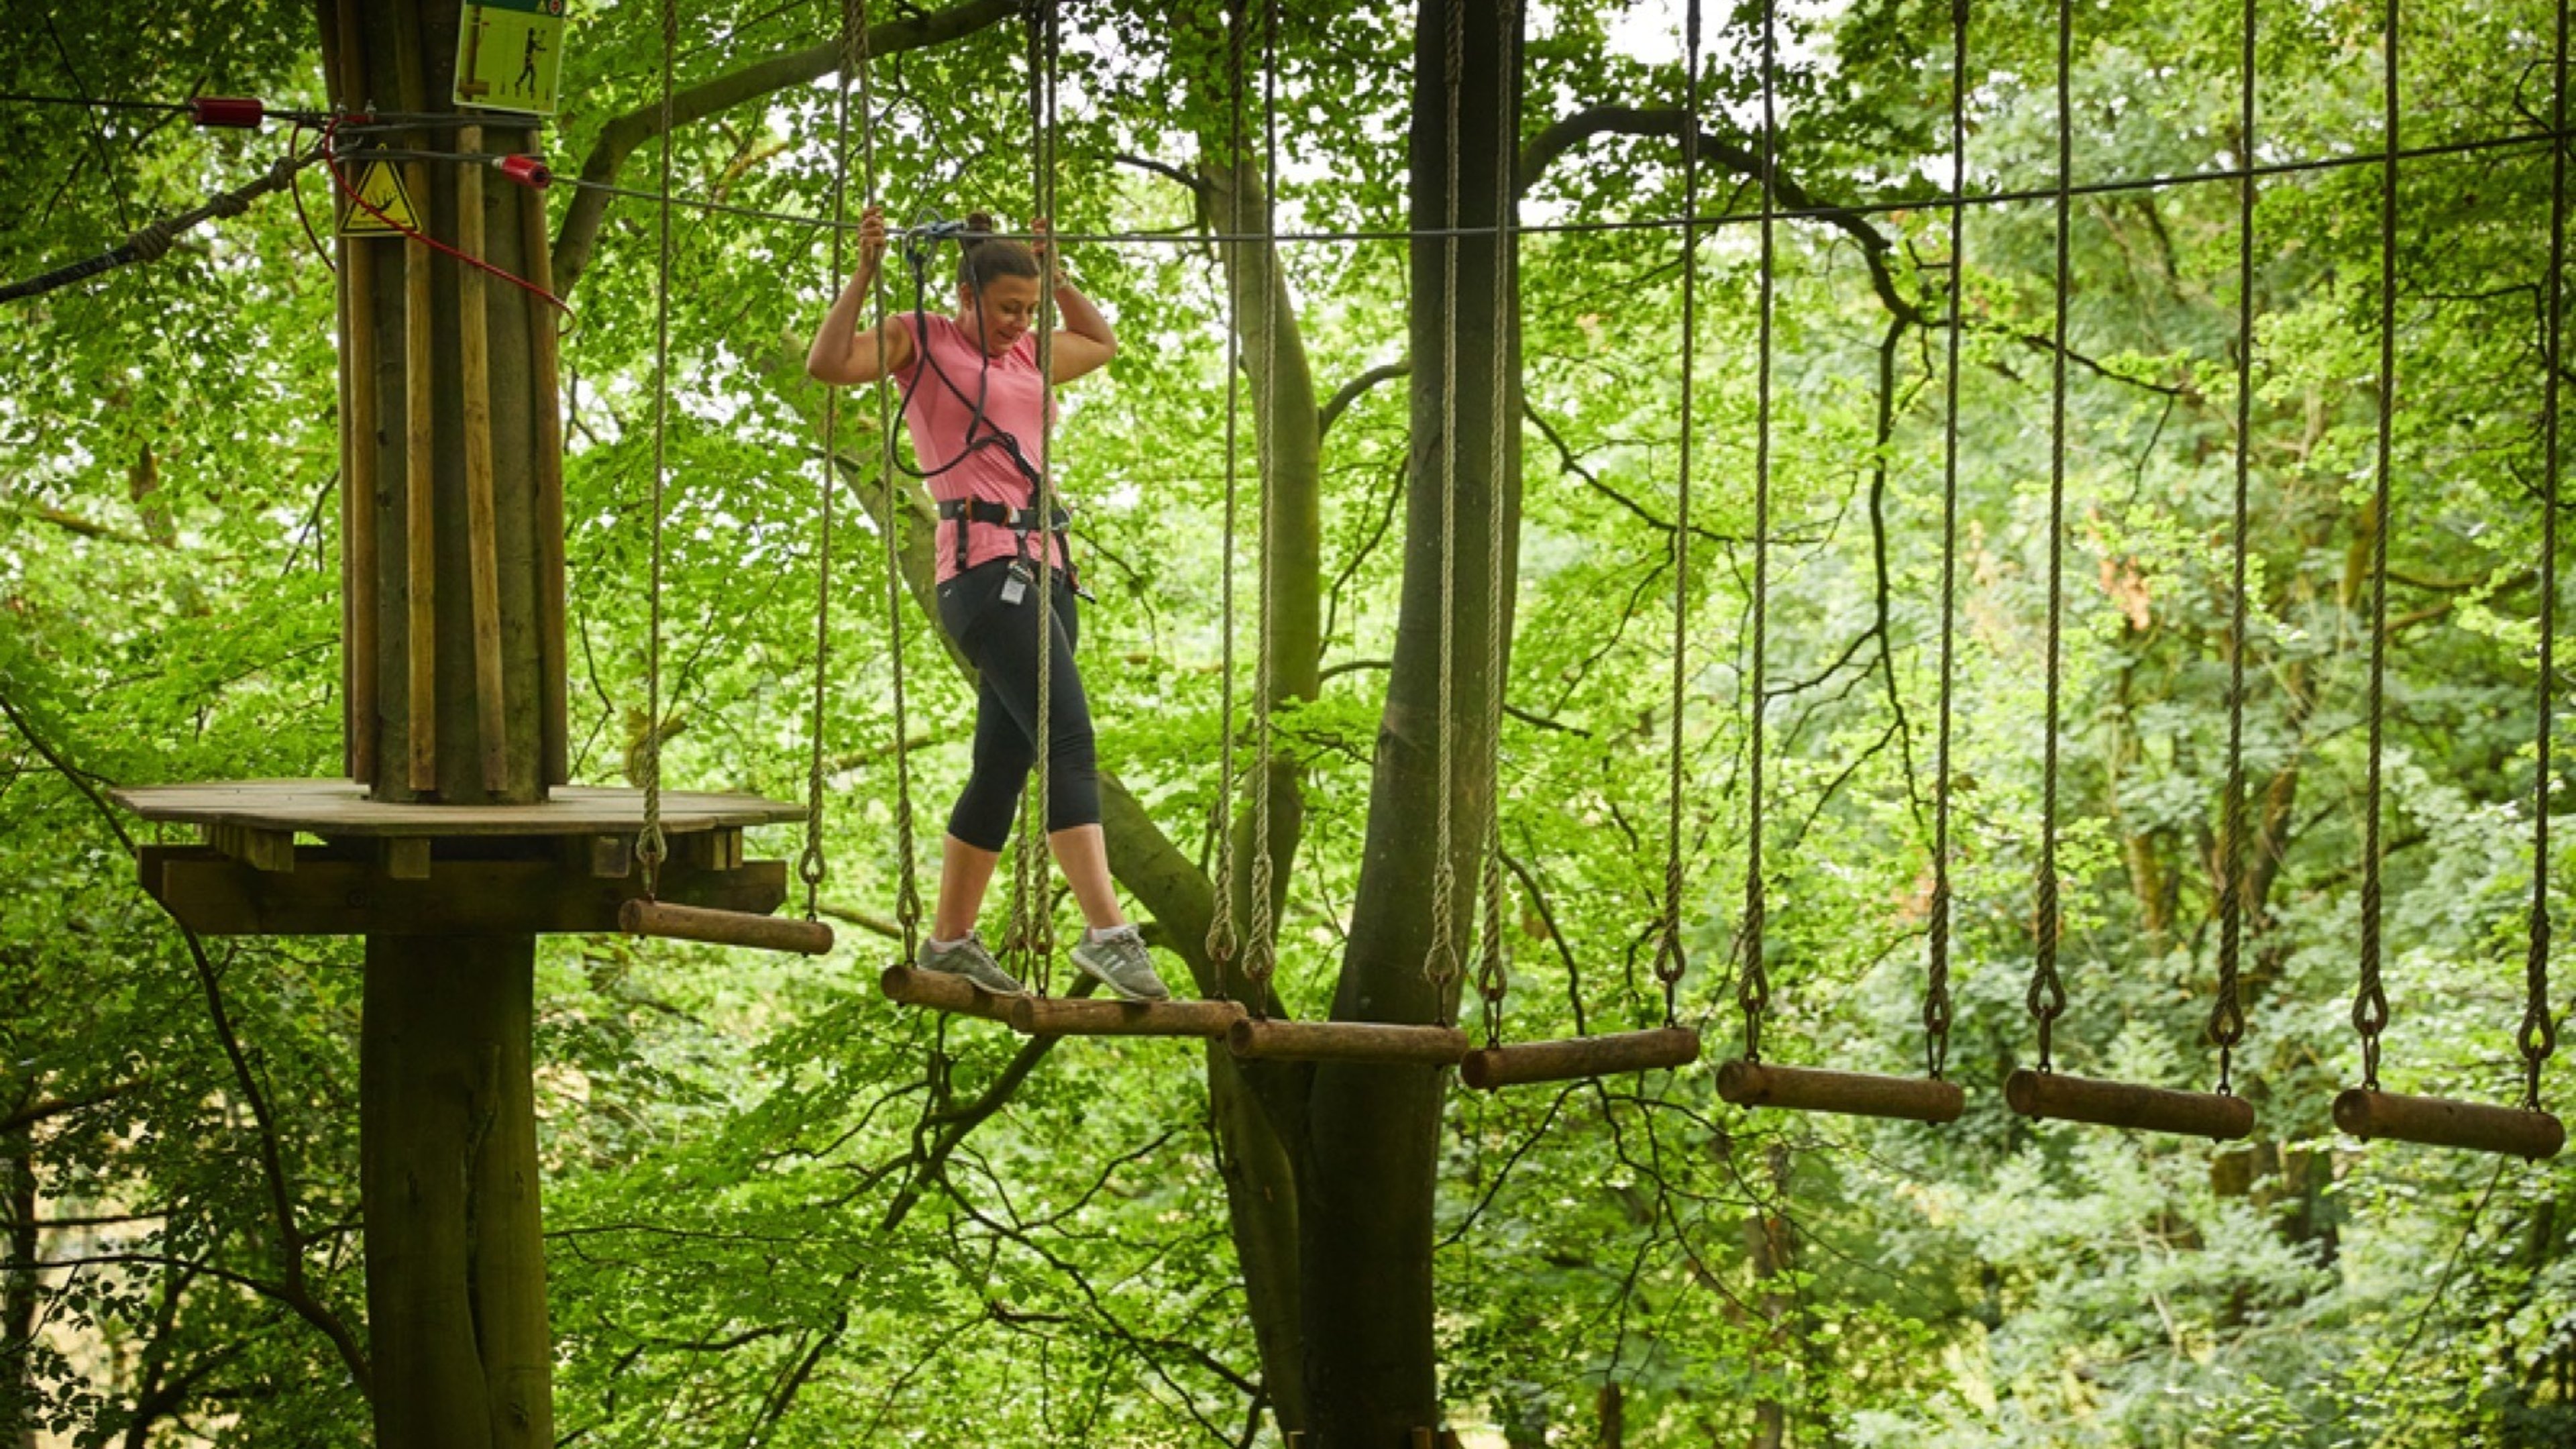 Go Ape in Delamere Forest Park